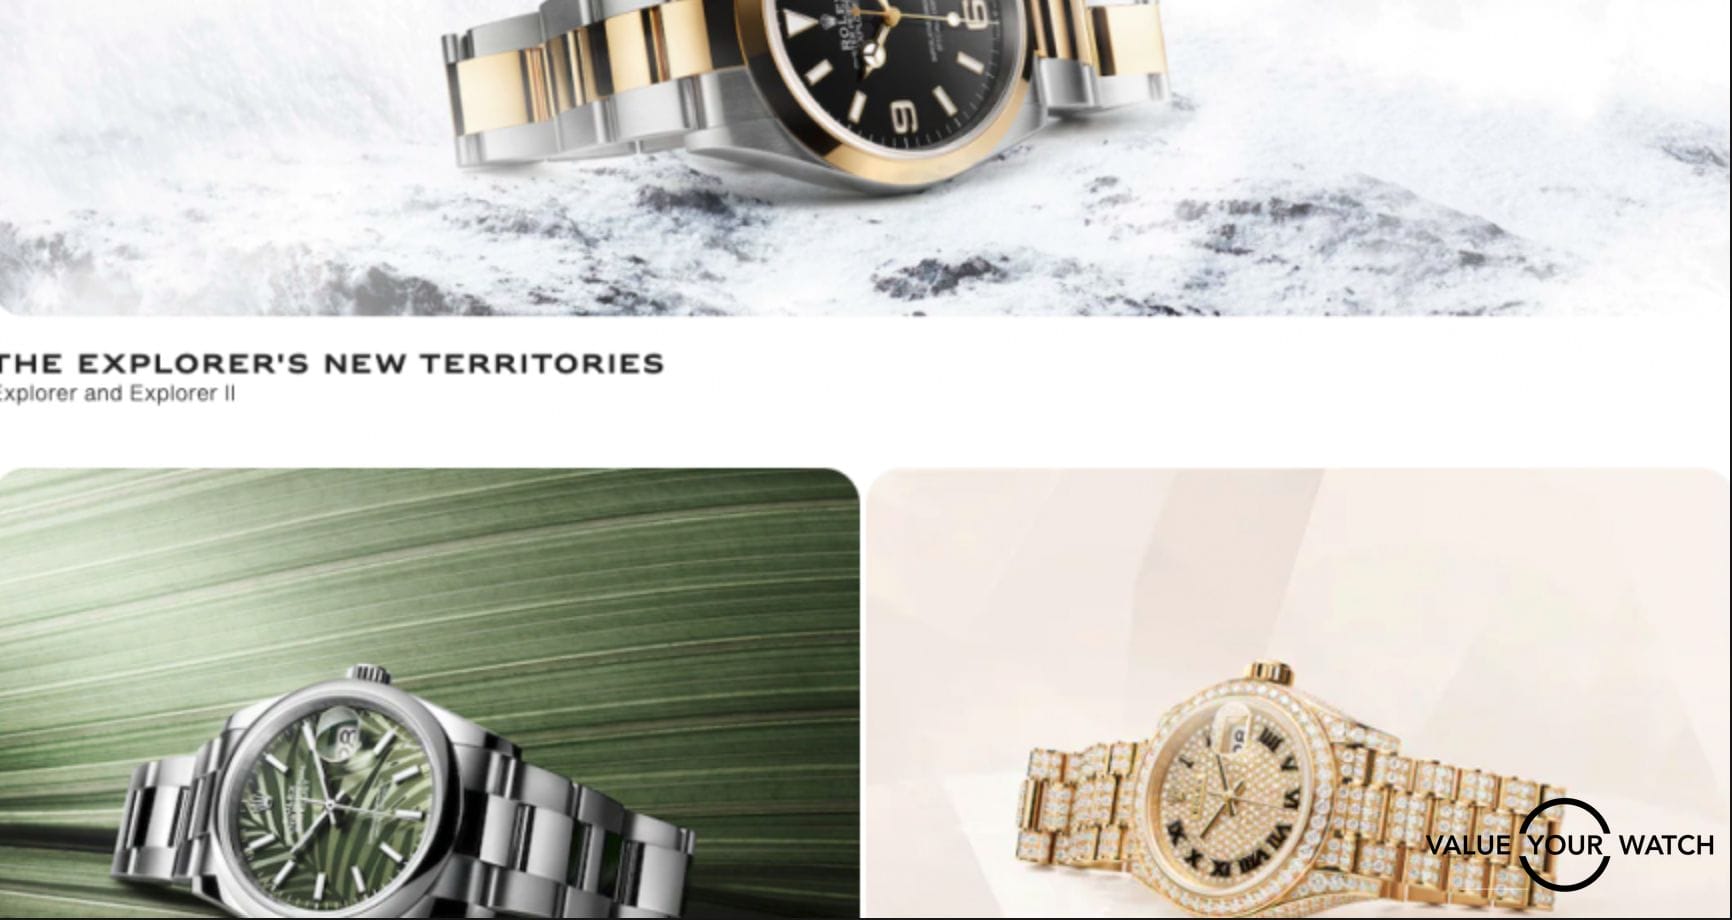 Ultimate Guide: How To Buy Your First Rolex Watch From an Authorized Dealer